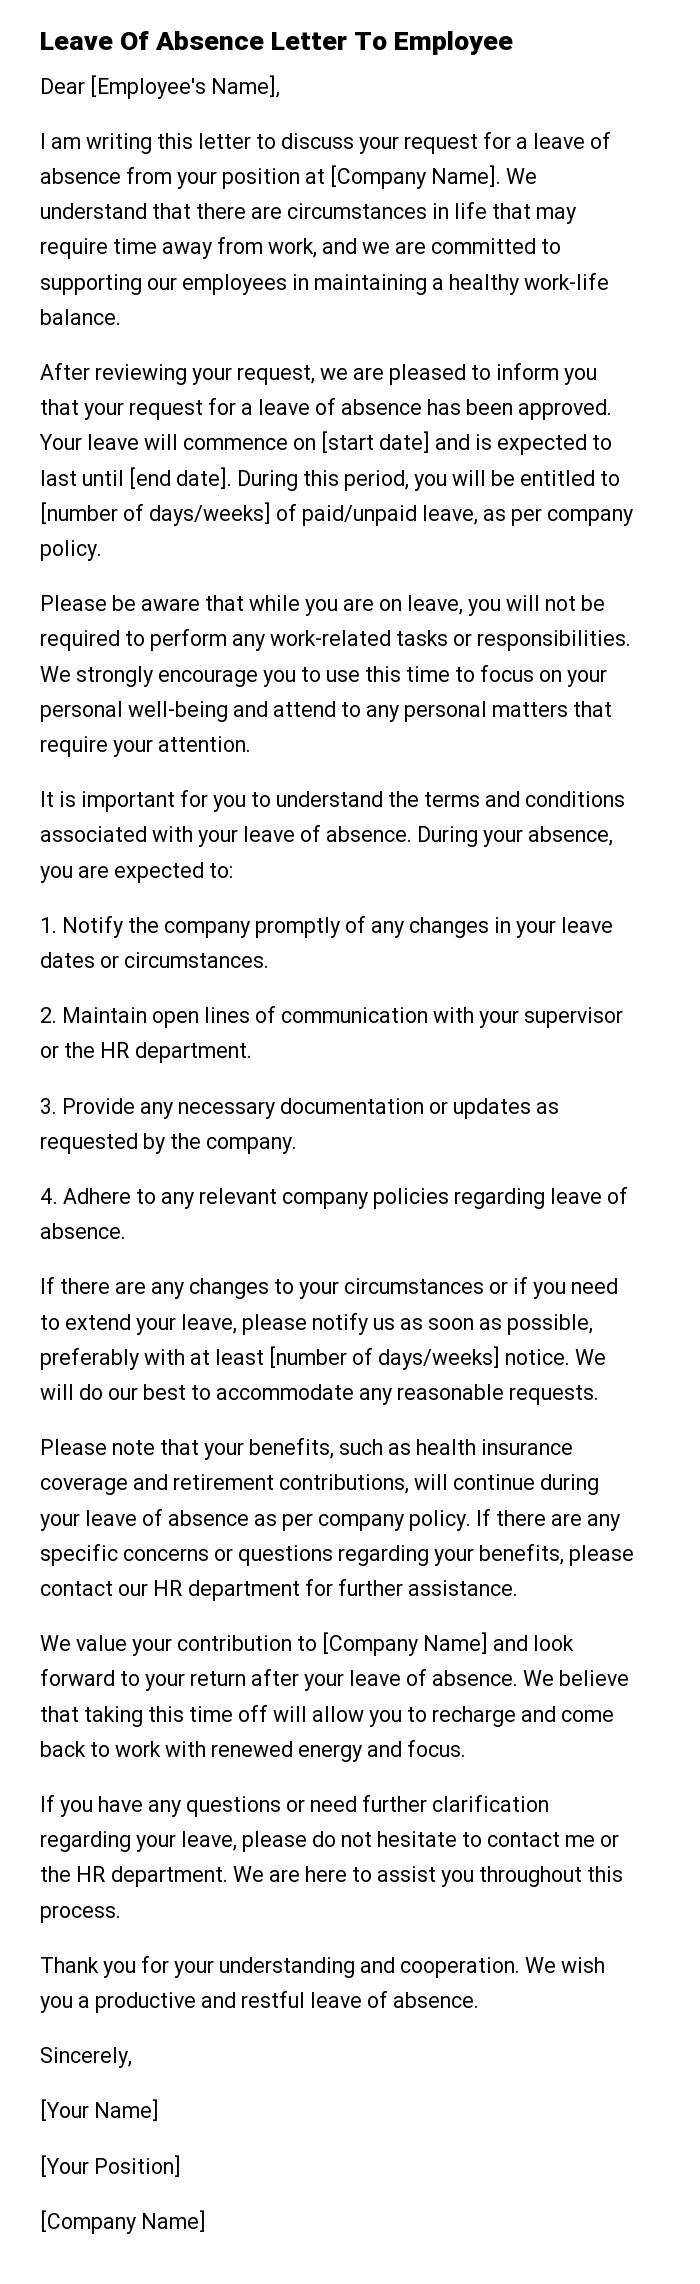 Leave Of Absence Letter To Employee